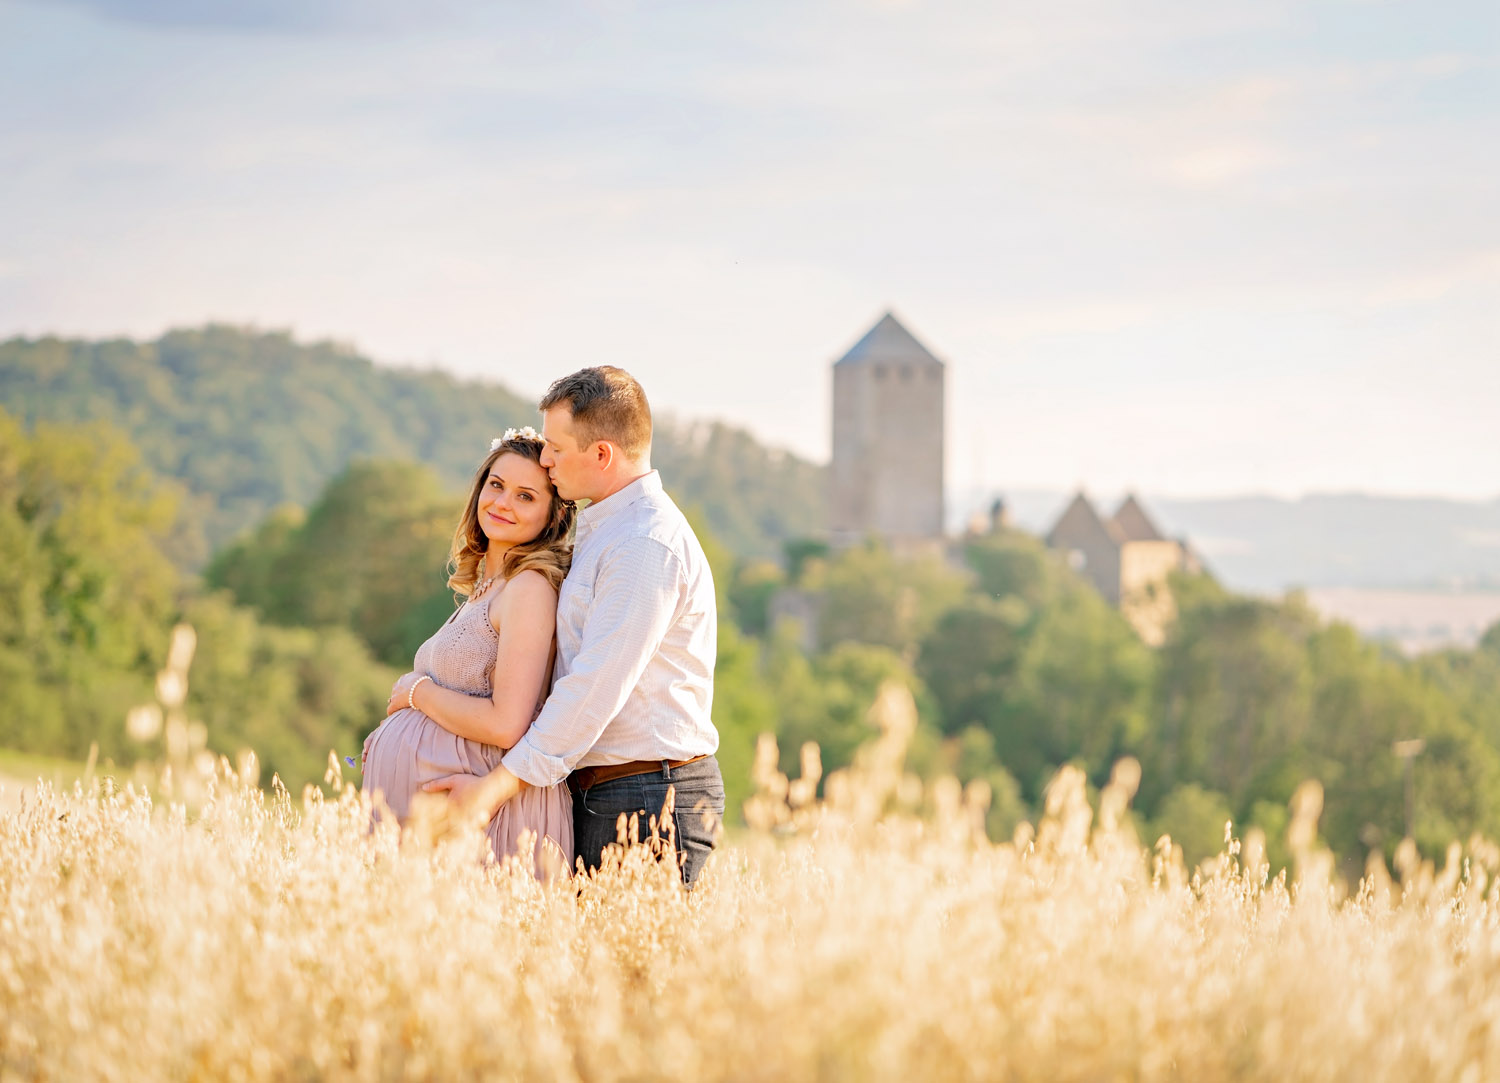  Romantic maternity Session at Lichtenberg Castle near Kusel with couple and expecting mother in summer time from natural light photographer Sarah Havens from Ramstein KMC area in Germany  Romantisches Schwangerschafts-Fotoshooting auf der Burg Licht